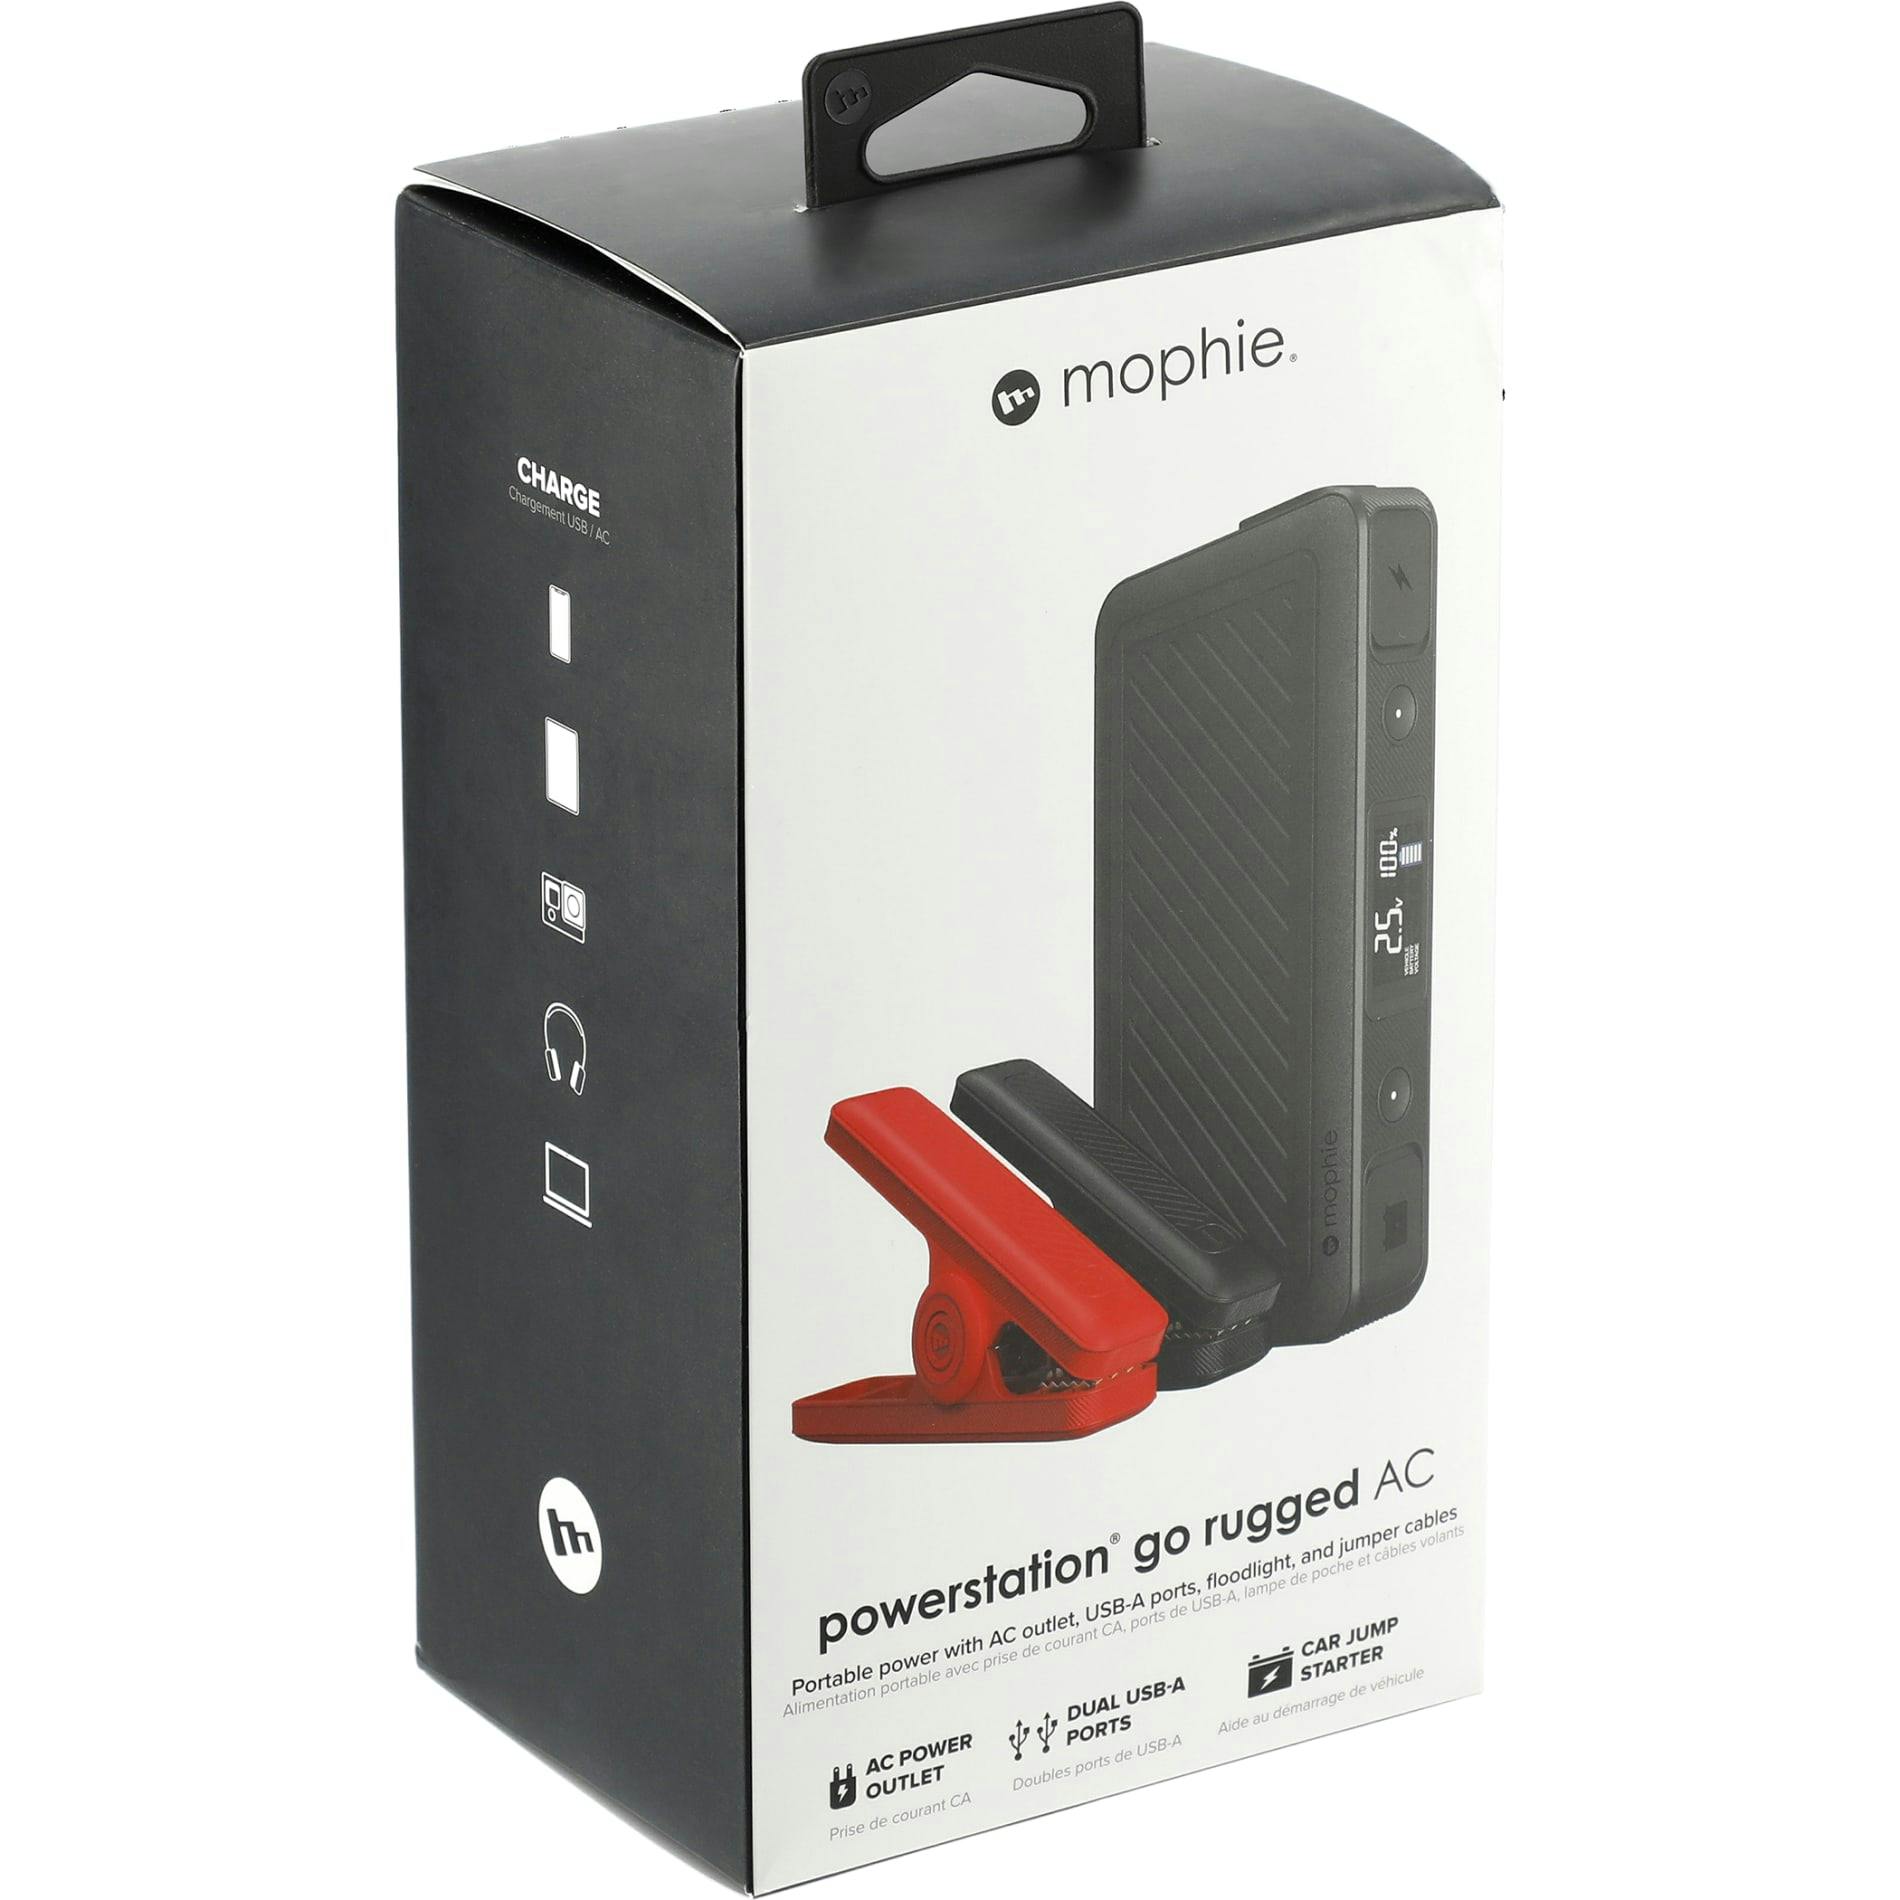 mophie® Powerstation Go Rugged AC - additional Image 4